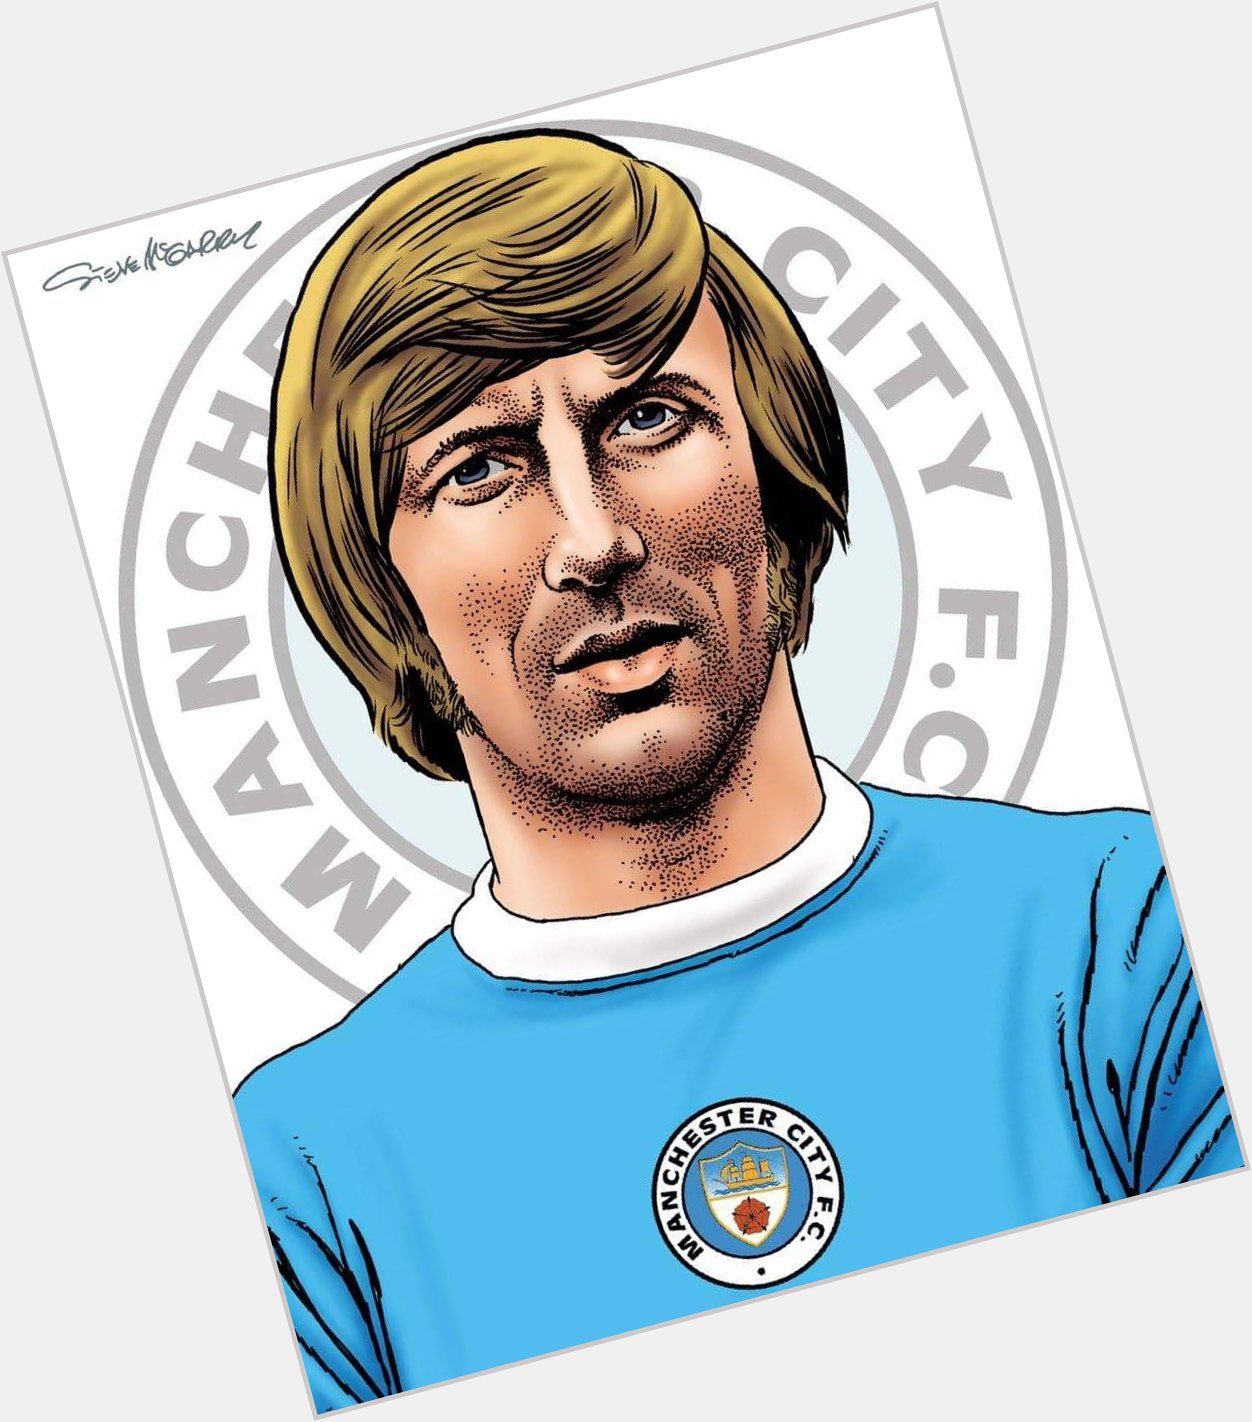 Happy birthday to legend Colin Bell 